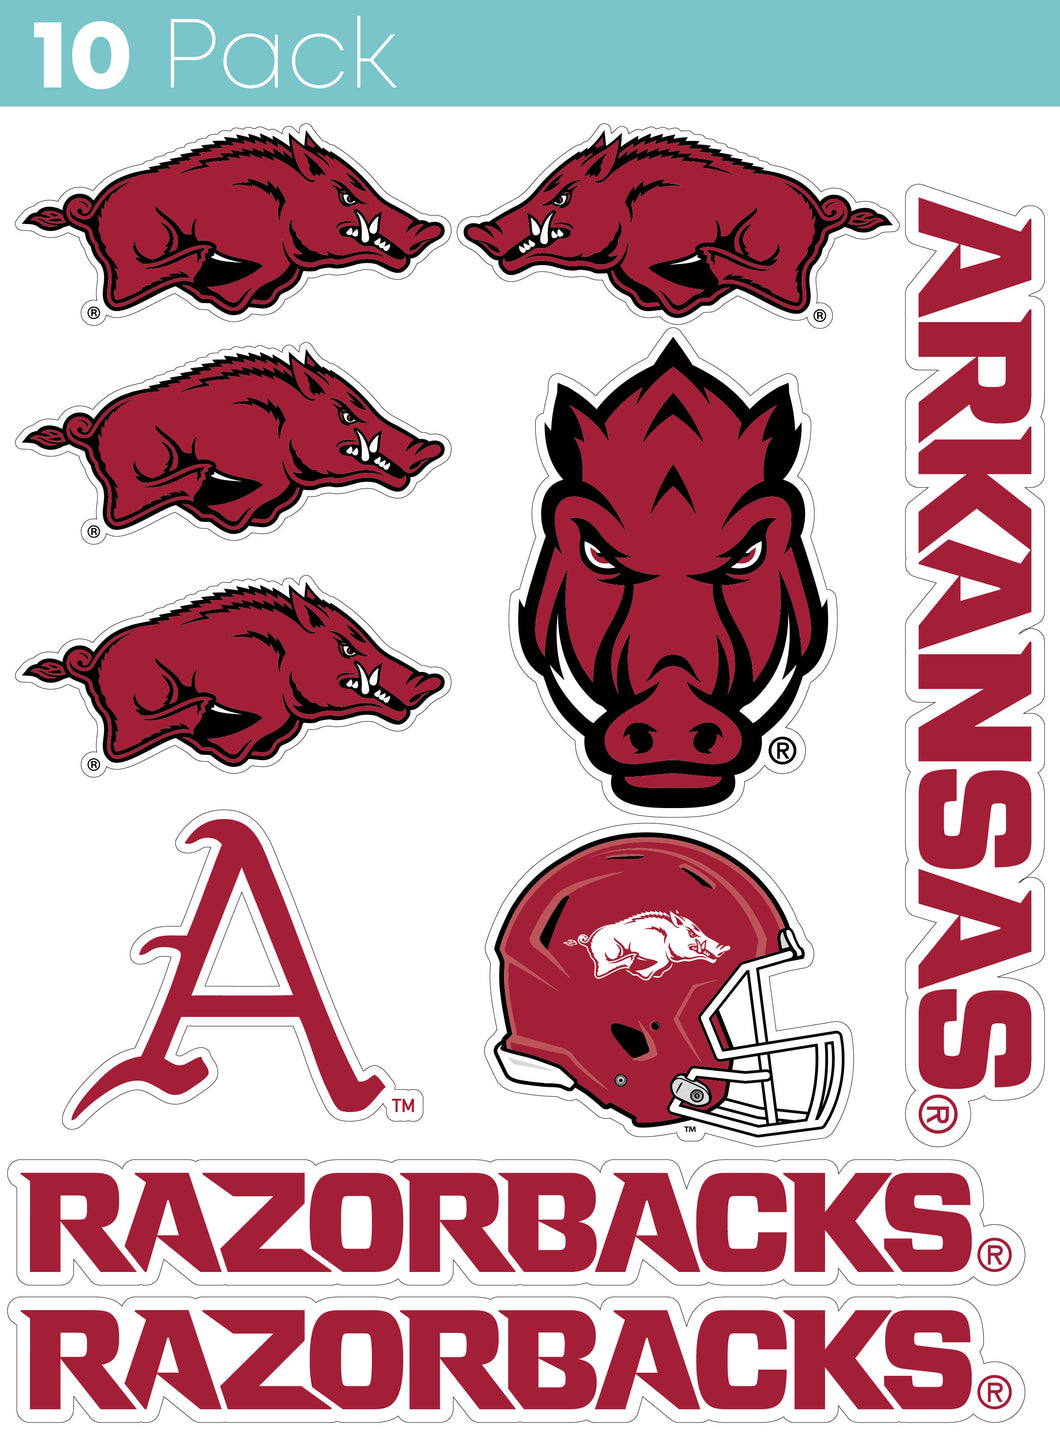 Arkansas Razorbacks 10-Pack, 4 inches in size on one of its sides NCAA Durable School Spirit Vinyl Decal Sticker